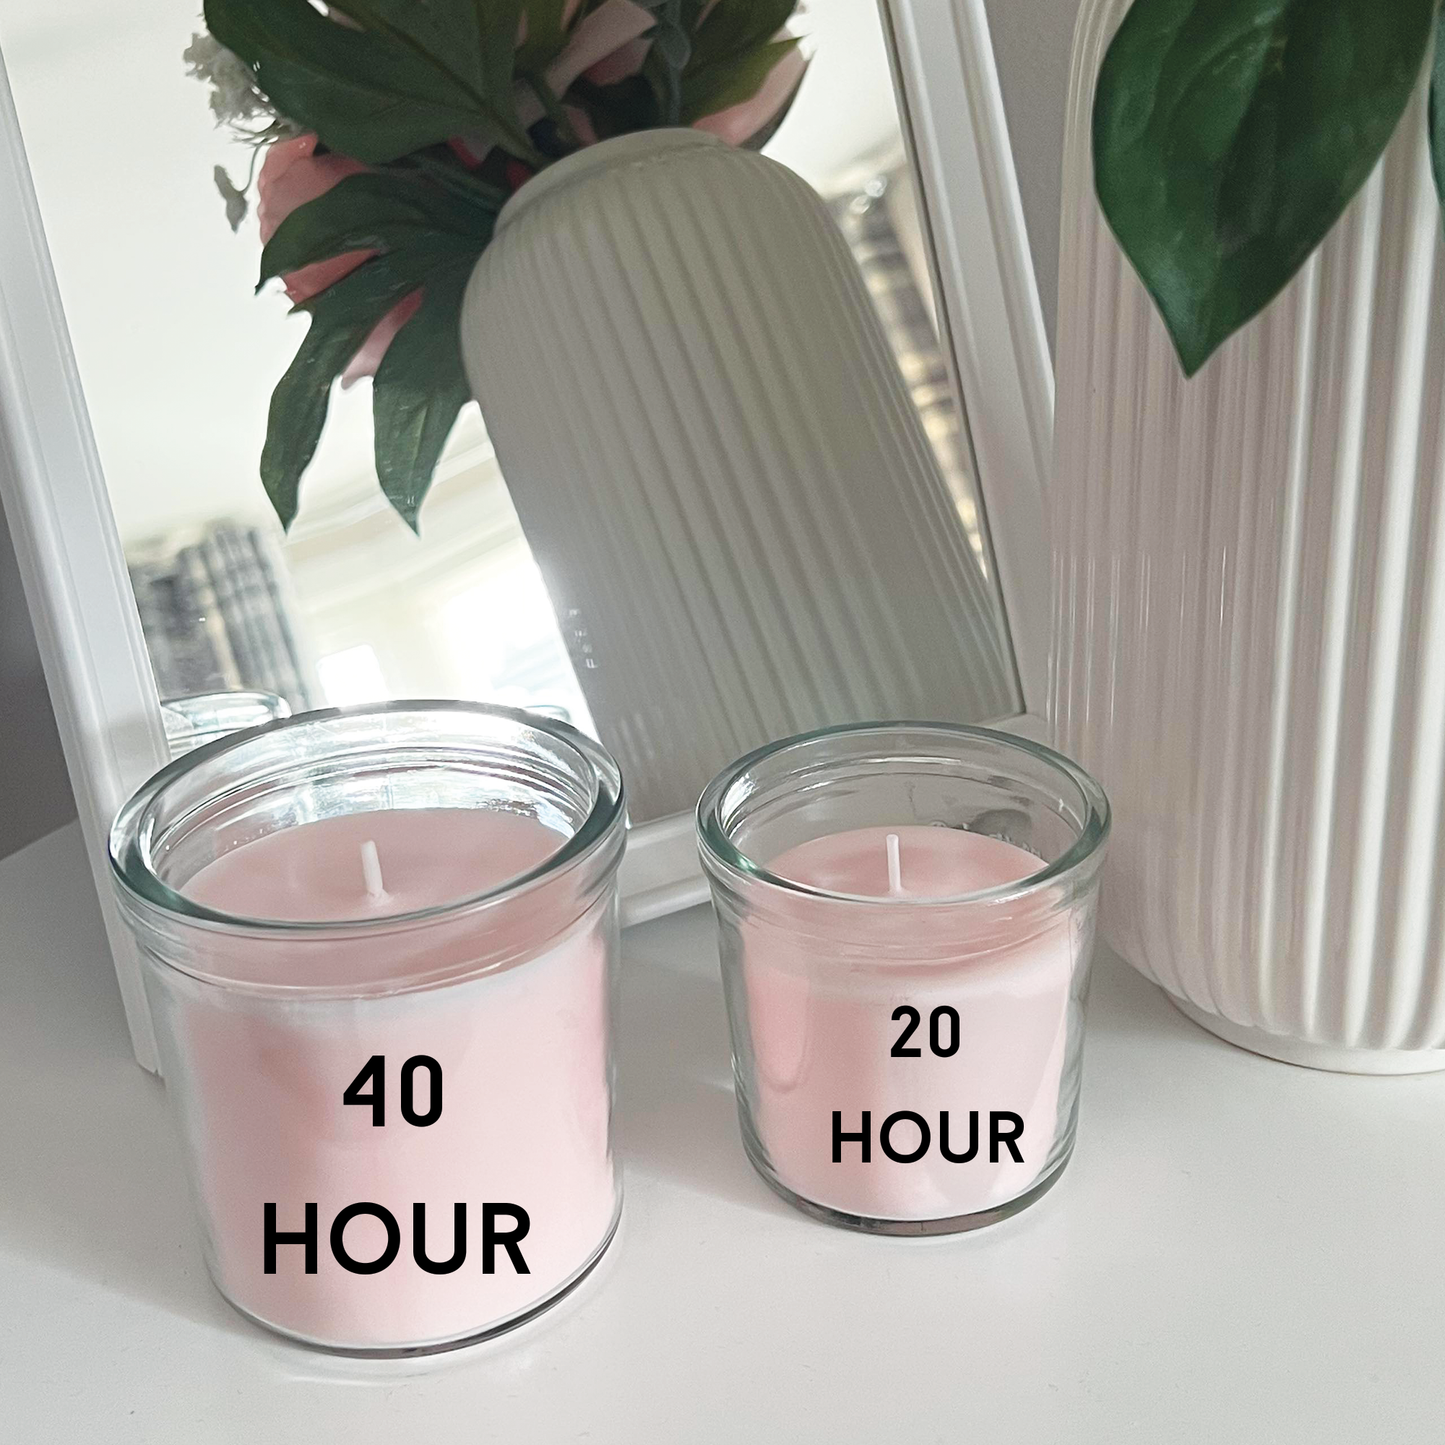 Personalised Mum's Last Nerve Candle - gift idea! Pink - Jasmine & Lily Scented